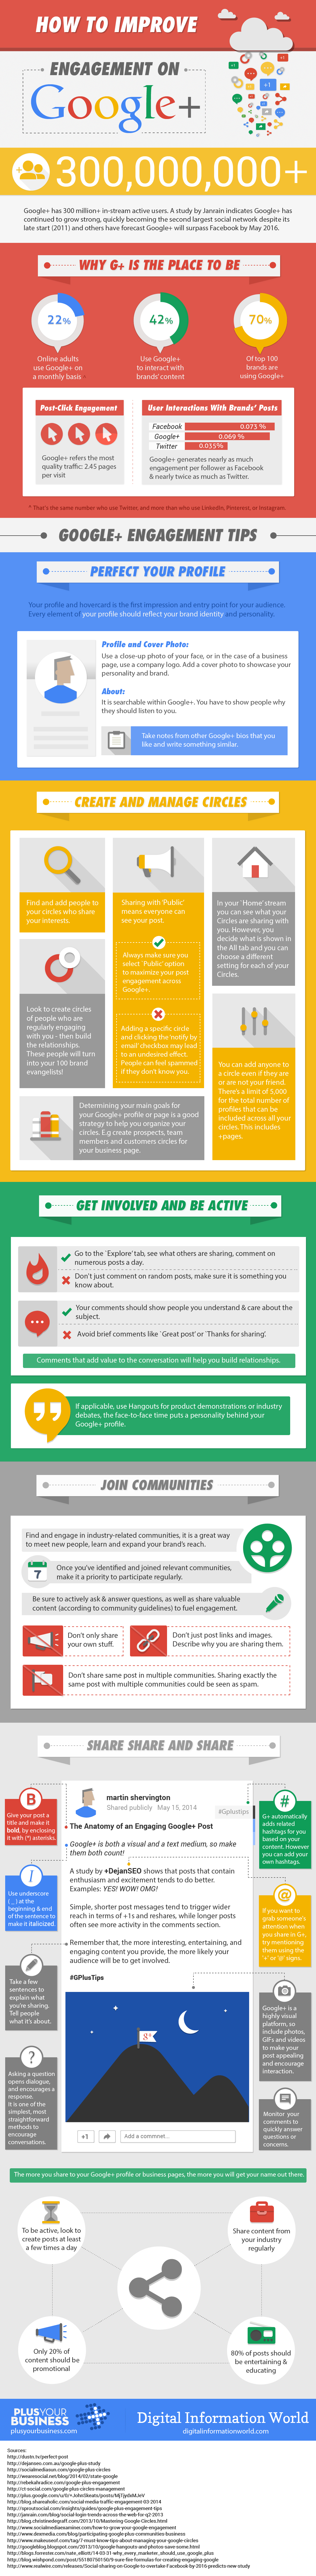 How to Skyrocket Your Google+ Engagement [Infographic]